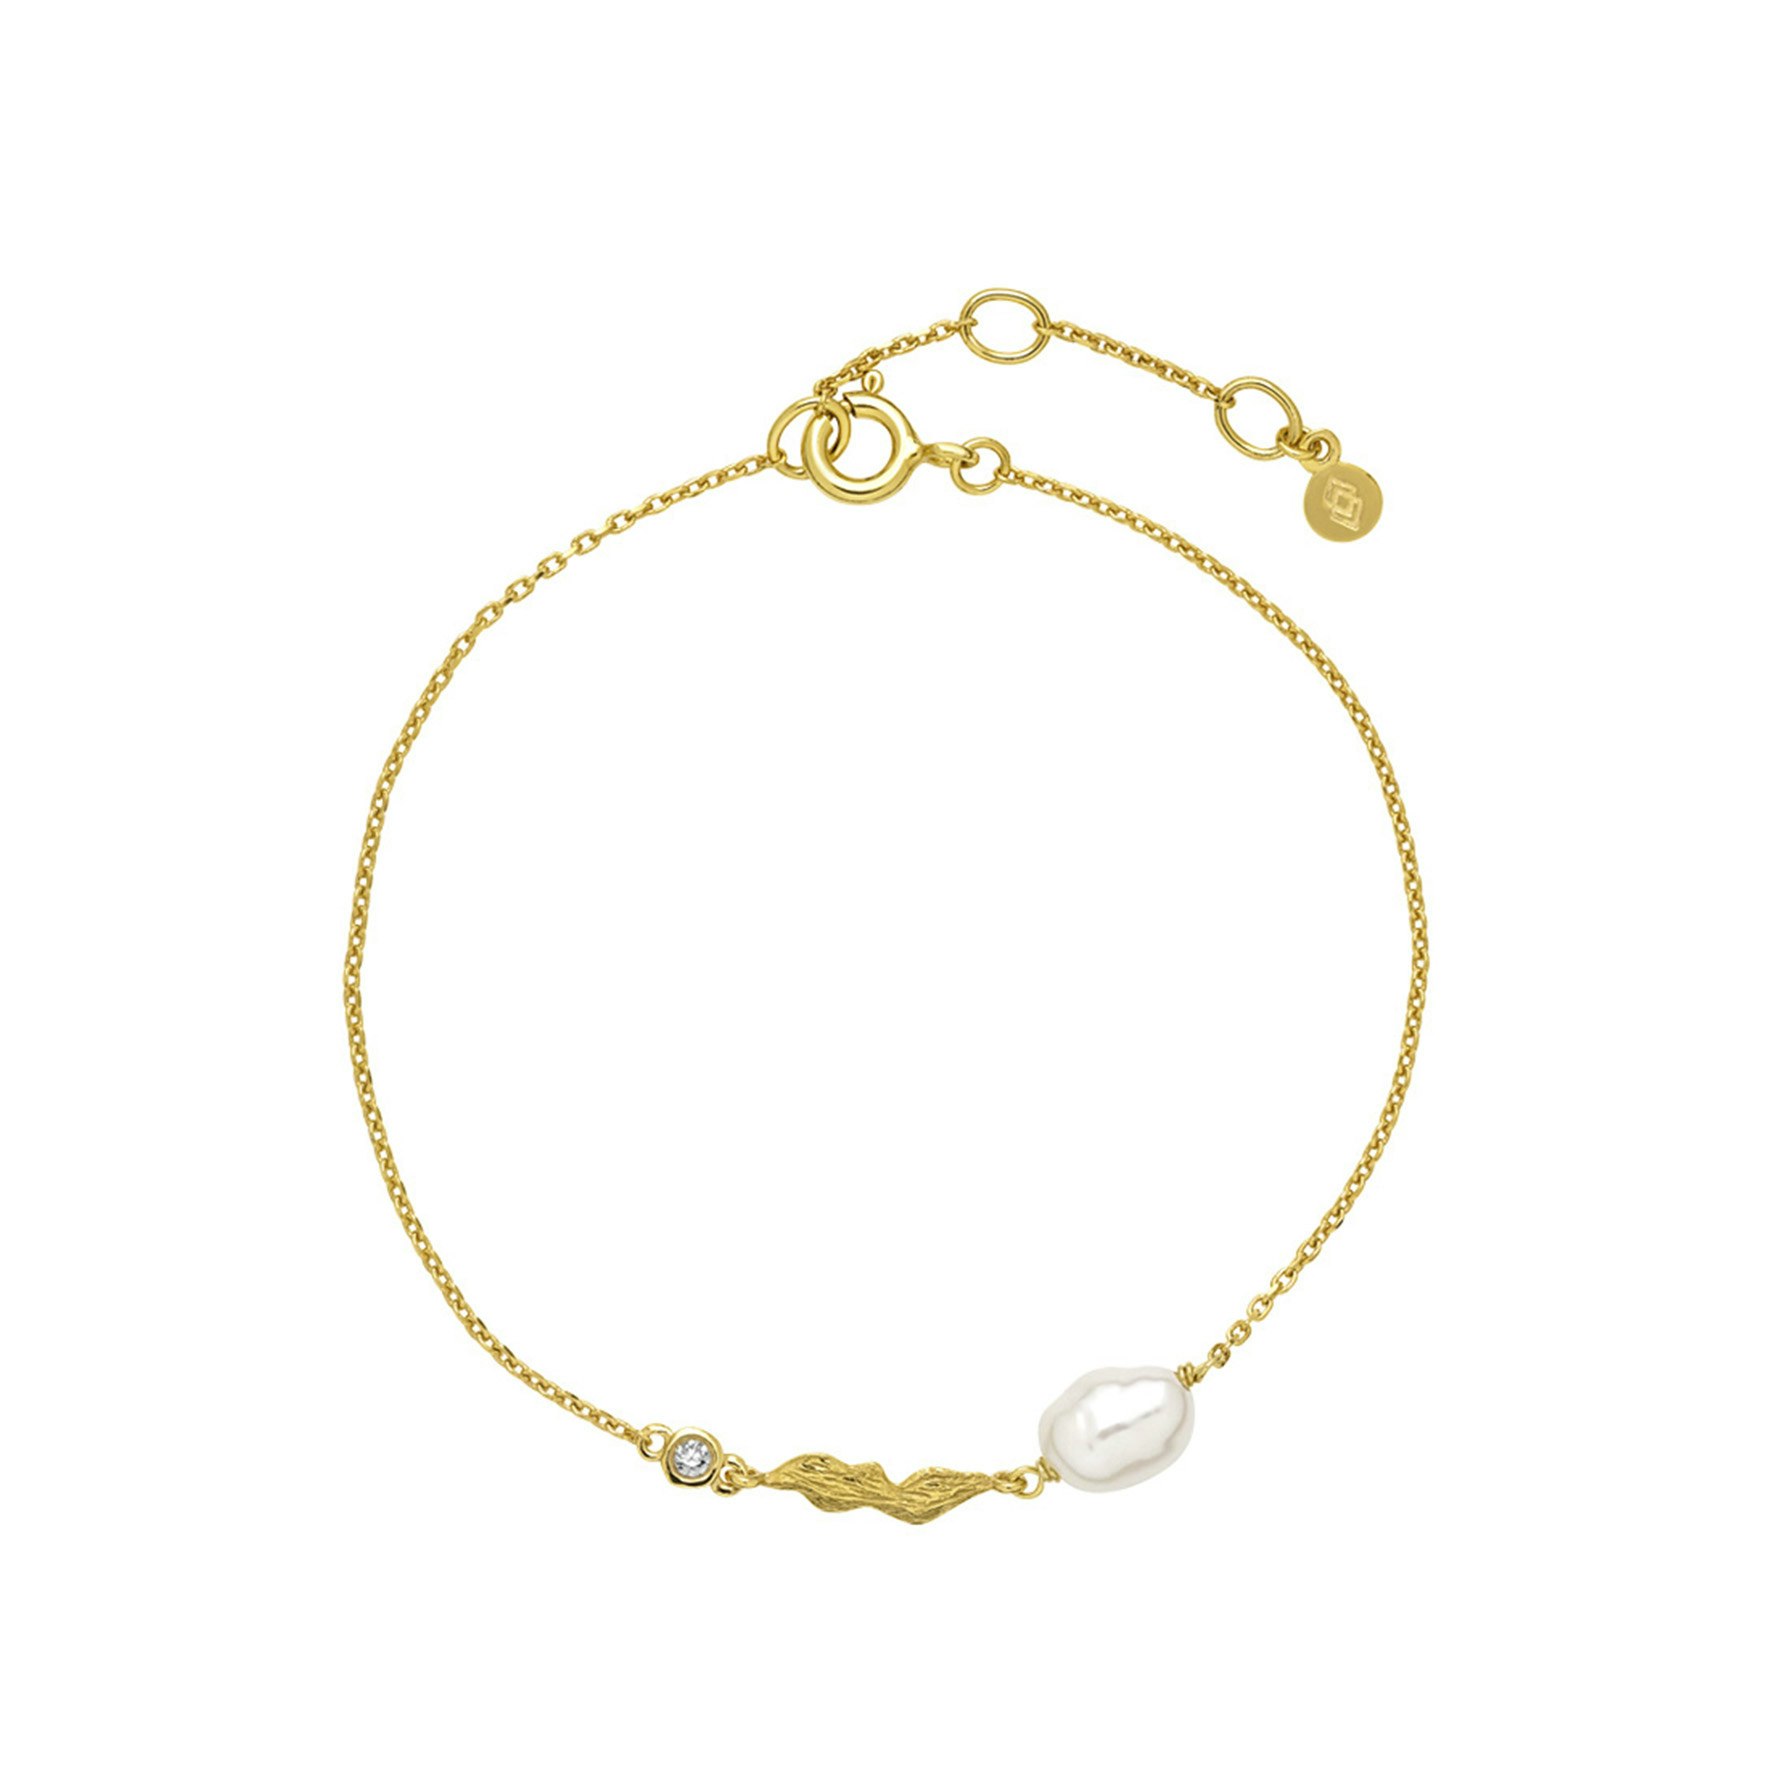 Fairy Bracelet from Izabel Camille in Goldplated-Silver Sterling 925